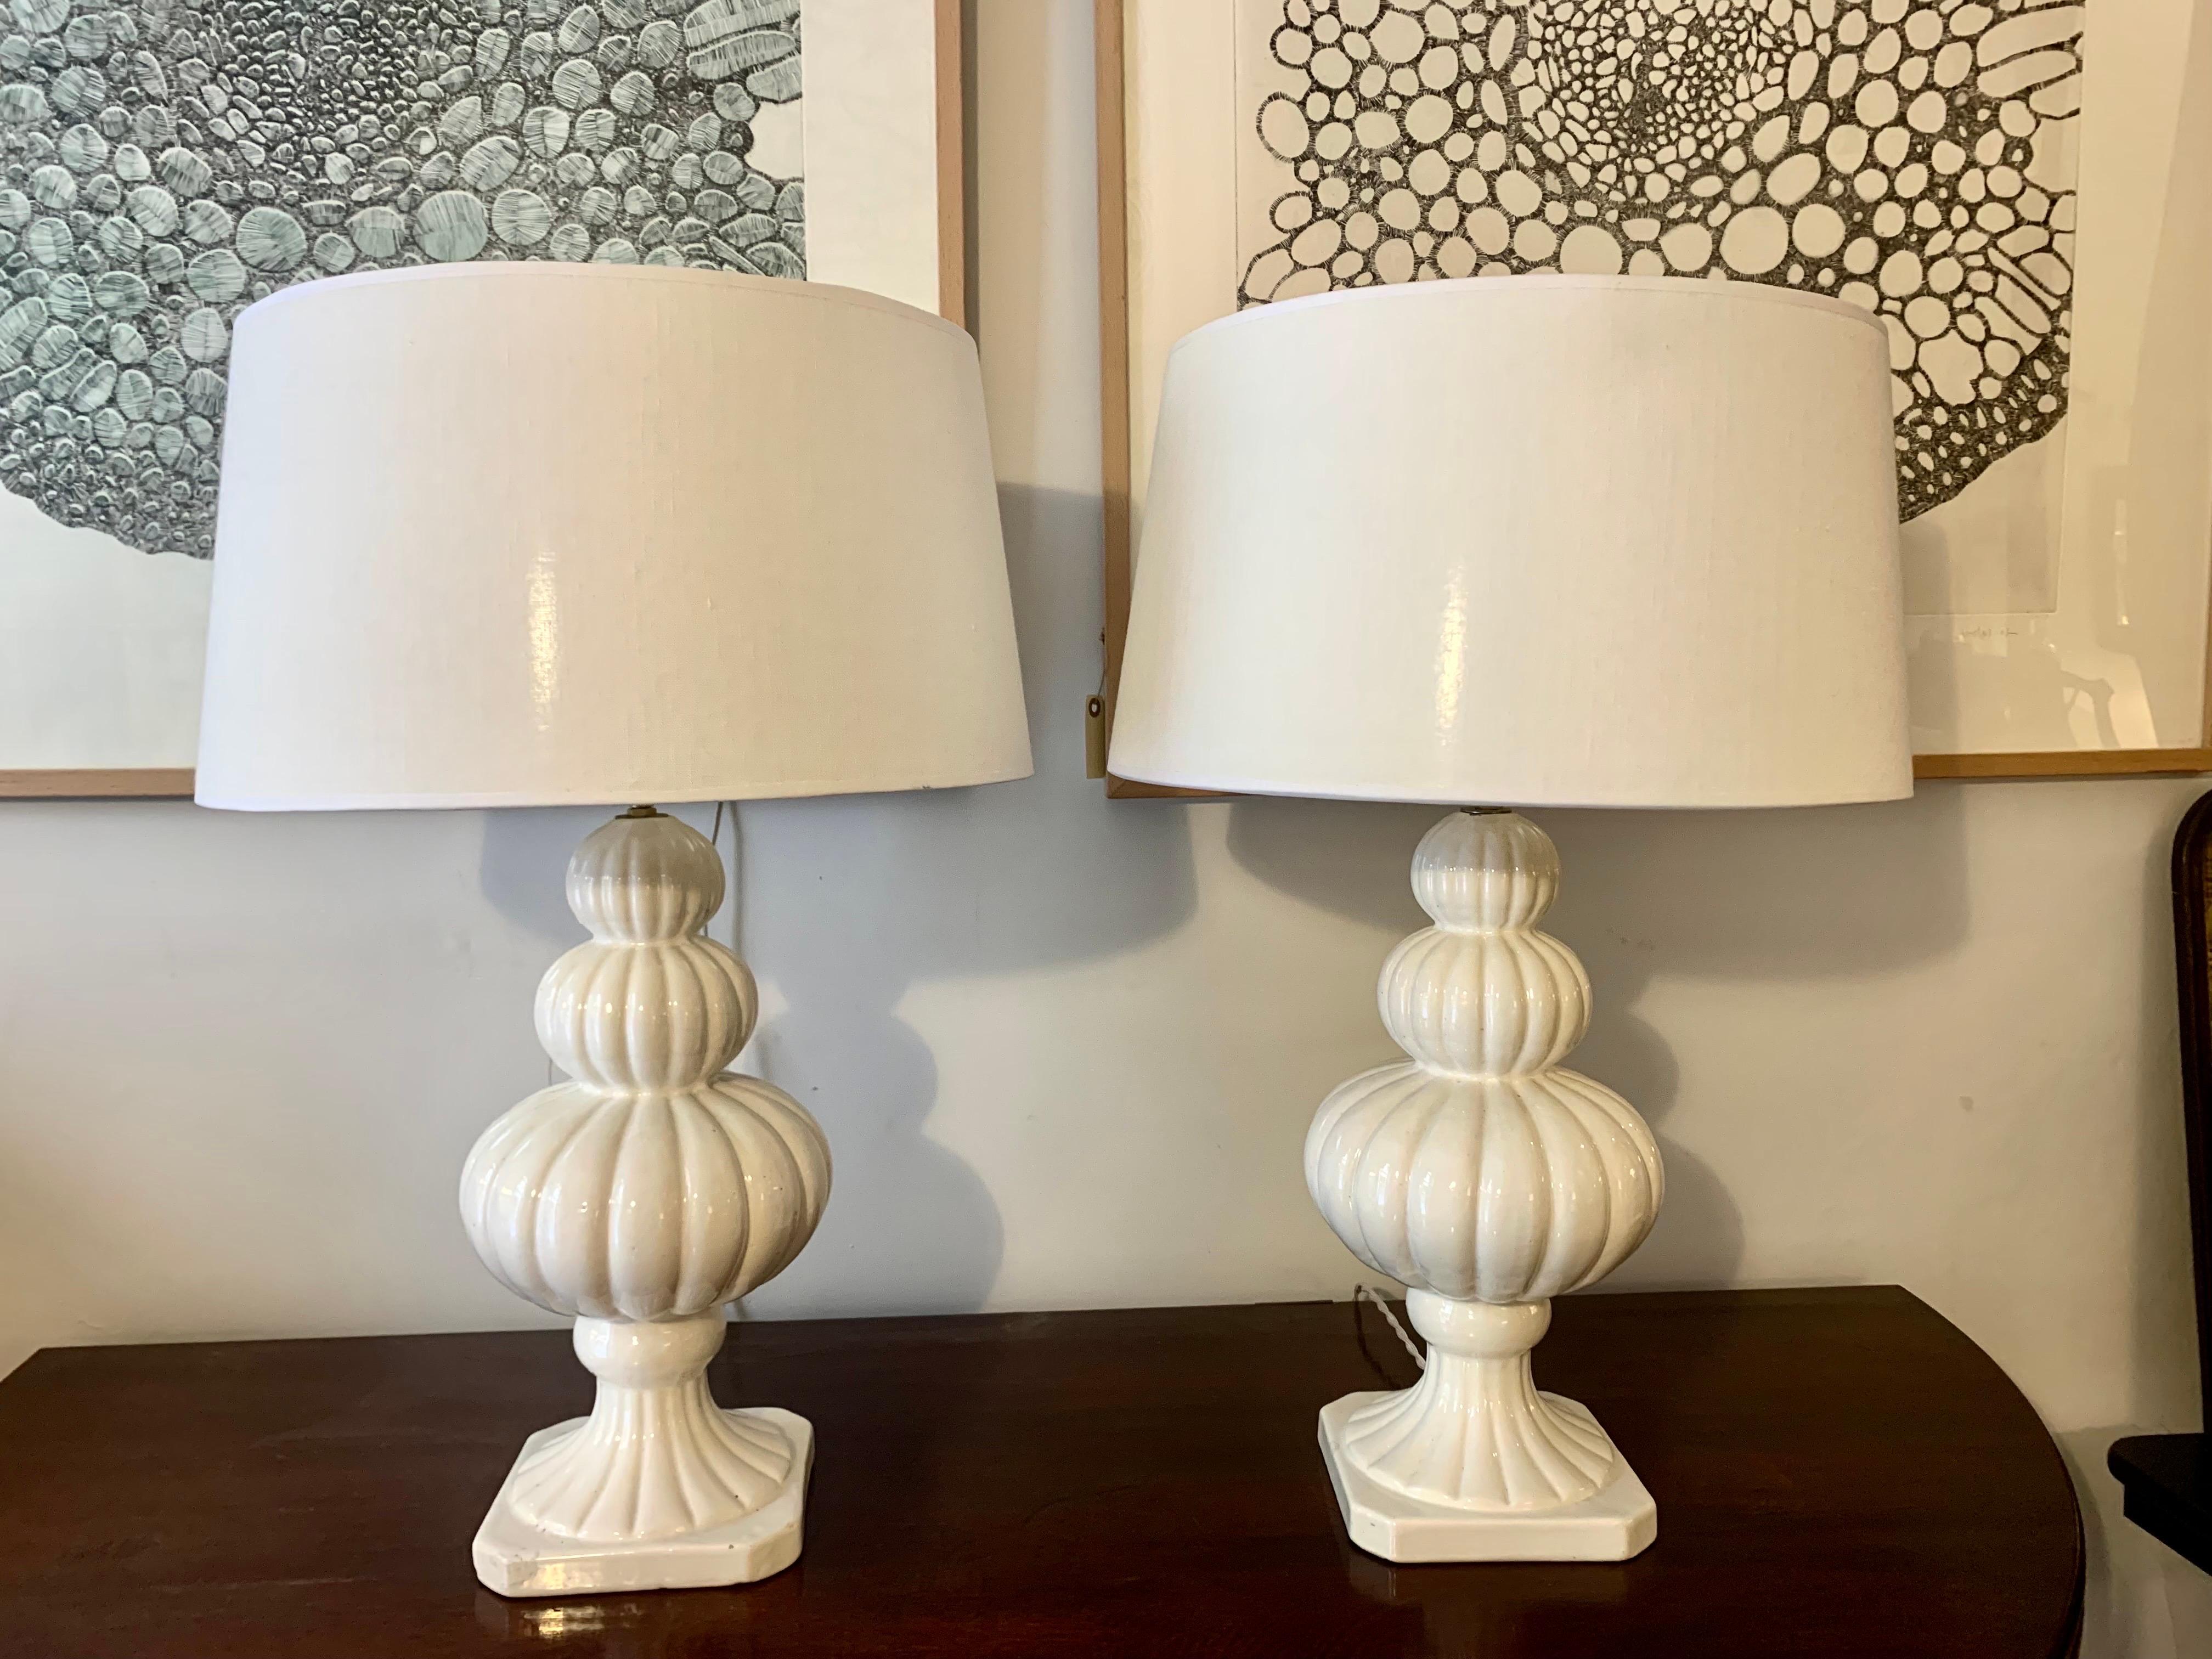 20th Midcentury Spanish Whithe Porcelain Table Lamps For Sale 1